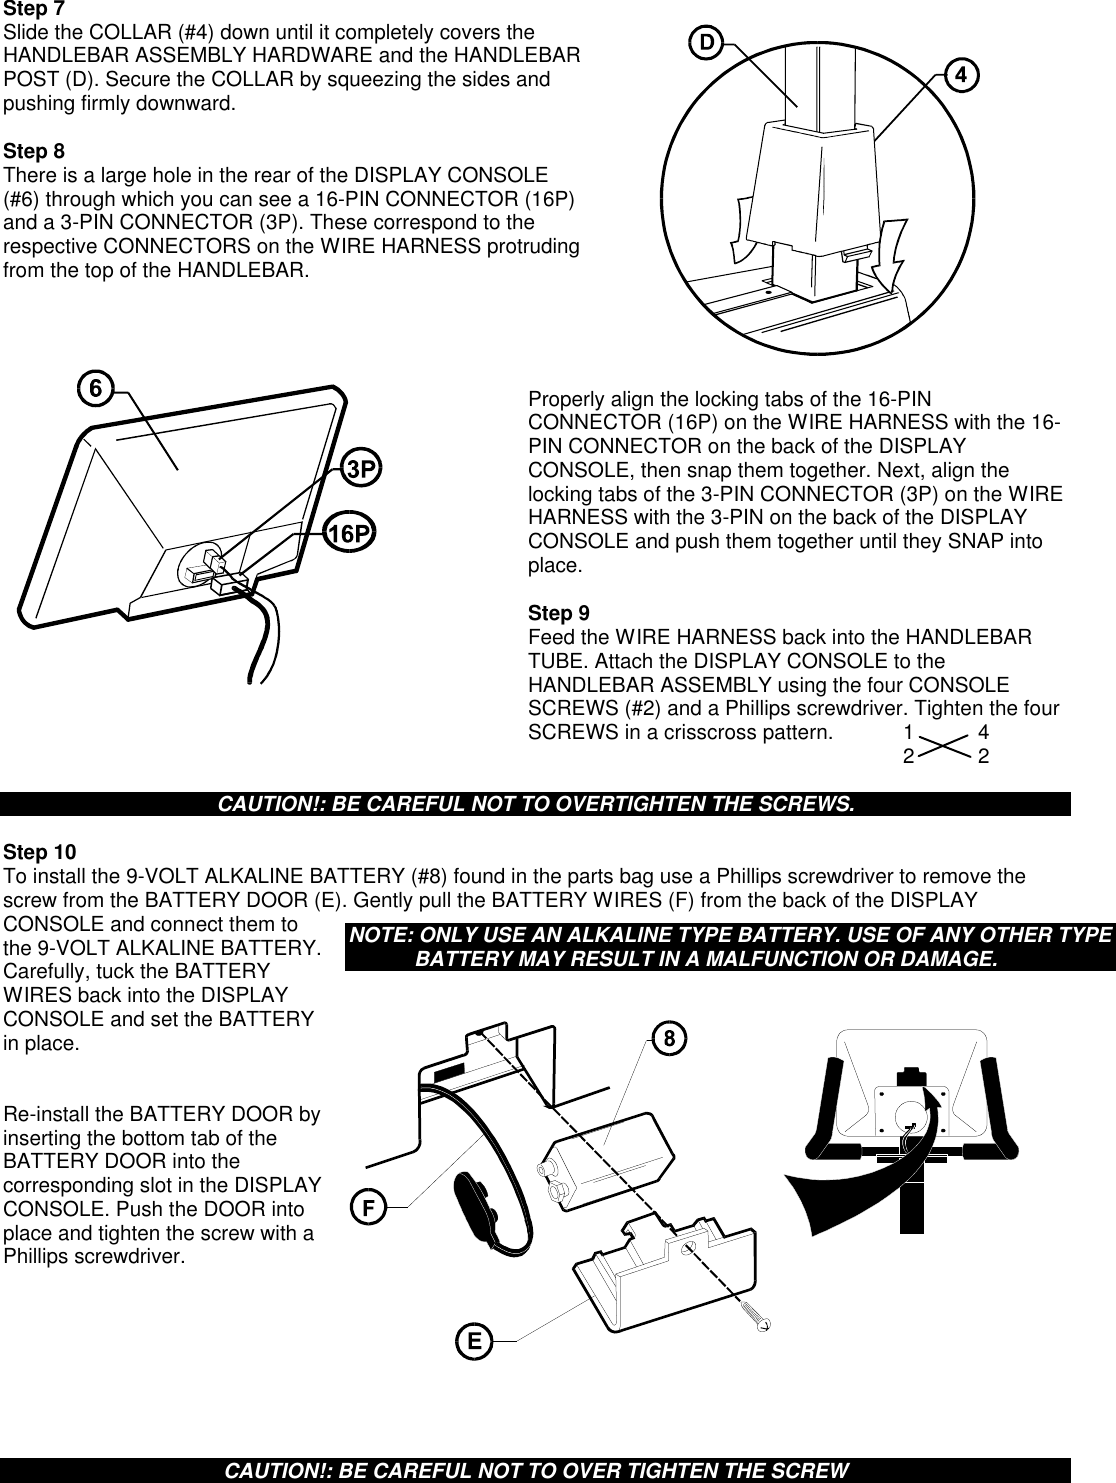 Page 6 of 7 - Life-Fitness Life-Fitness-Exercise-Bike-Lifecycle-8500-Users-Manual- 20A052V1  Life-fitness-exercise-bike-lifecycle-8500-users-manual